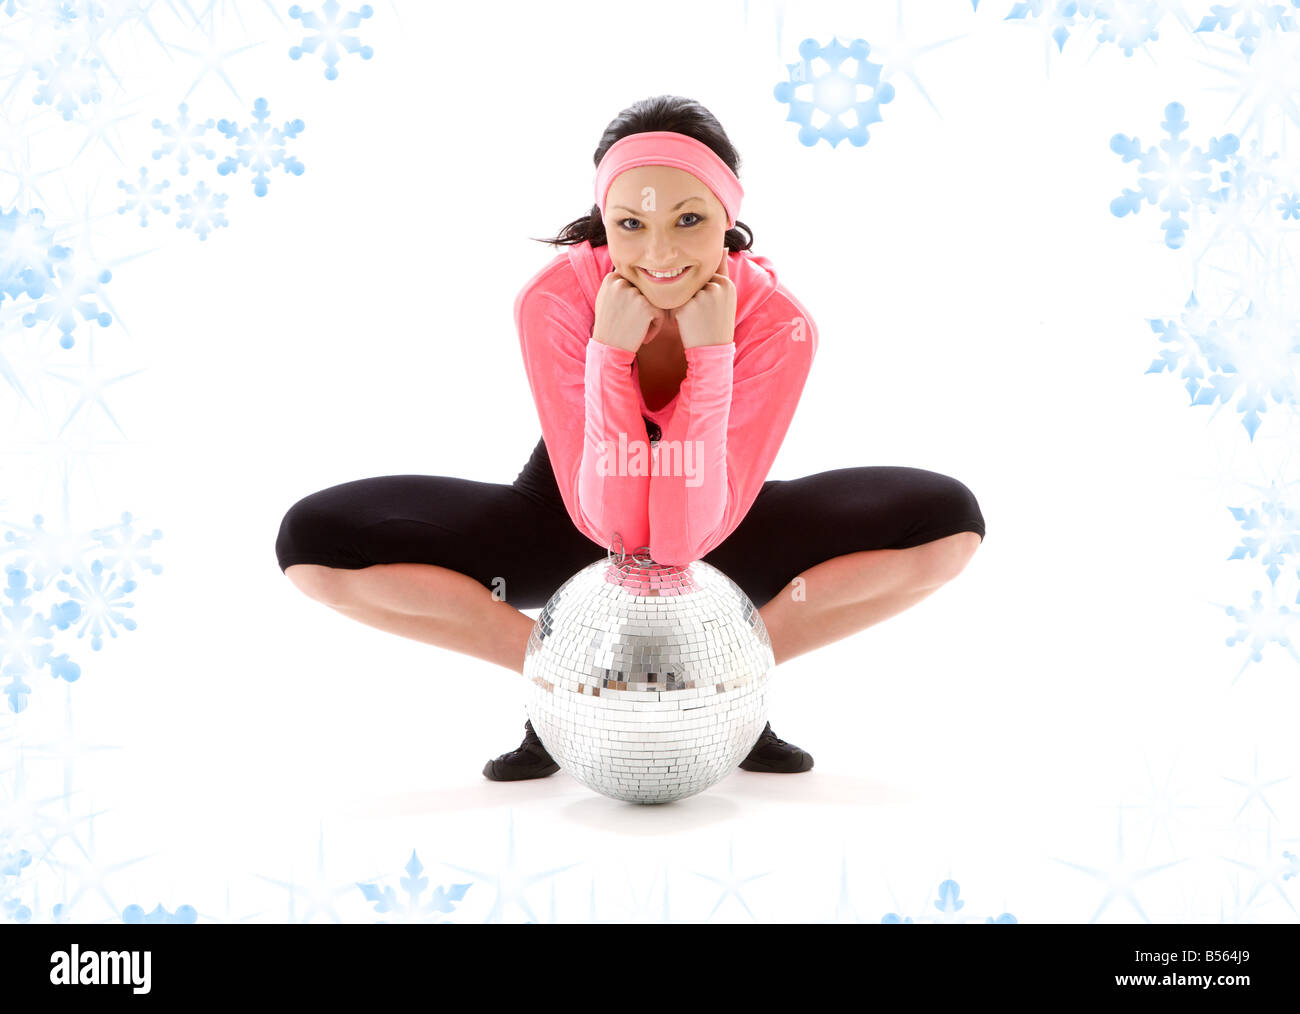 picture of dancer girl with glitterball and snowflakes Stock Photo